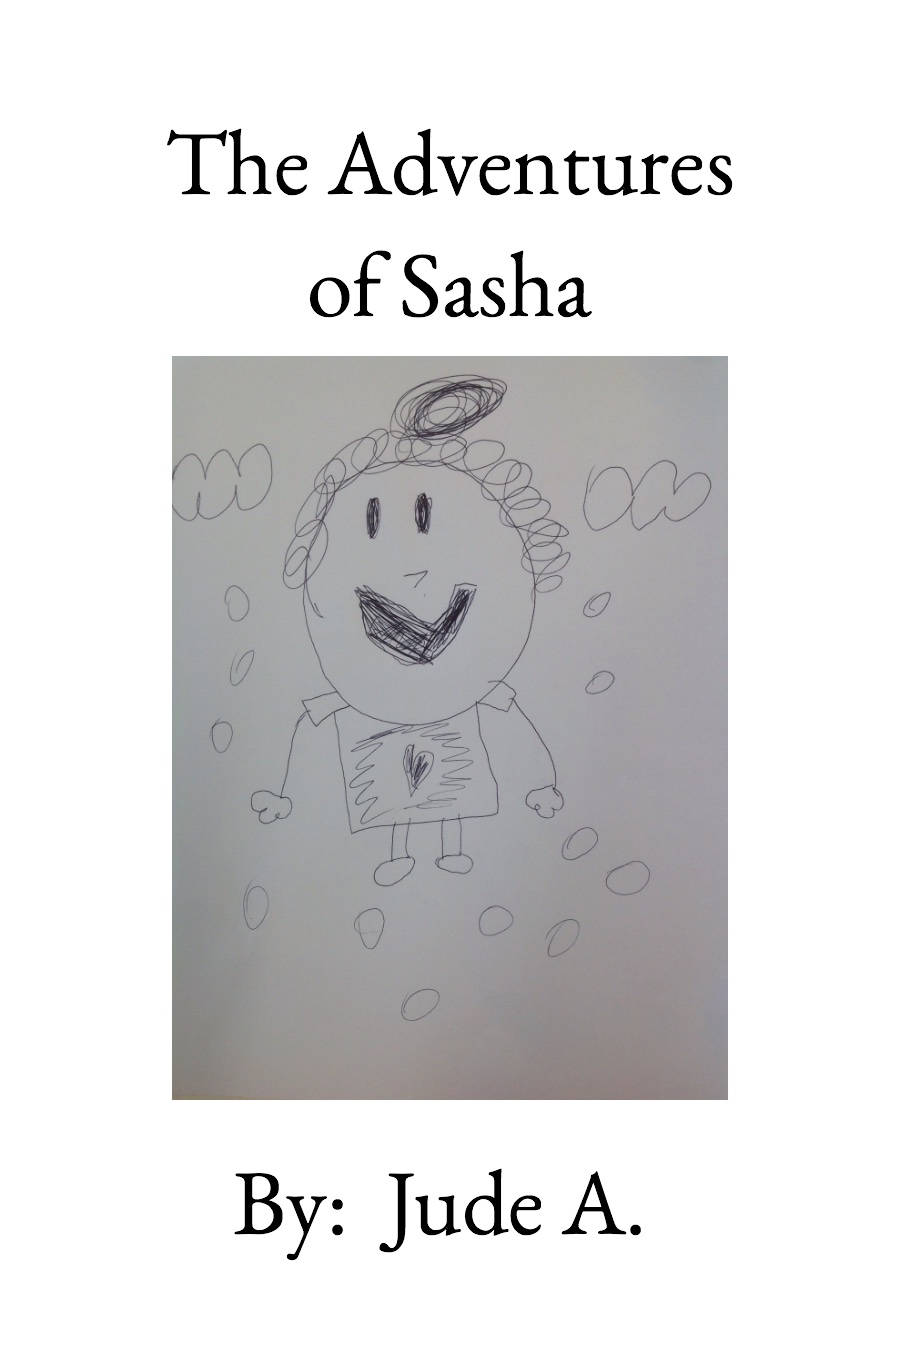 The Adventures of Sasha by Jude A